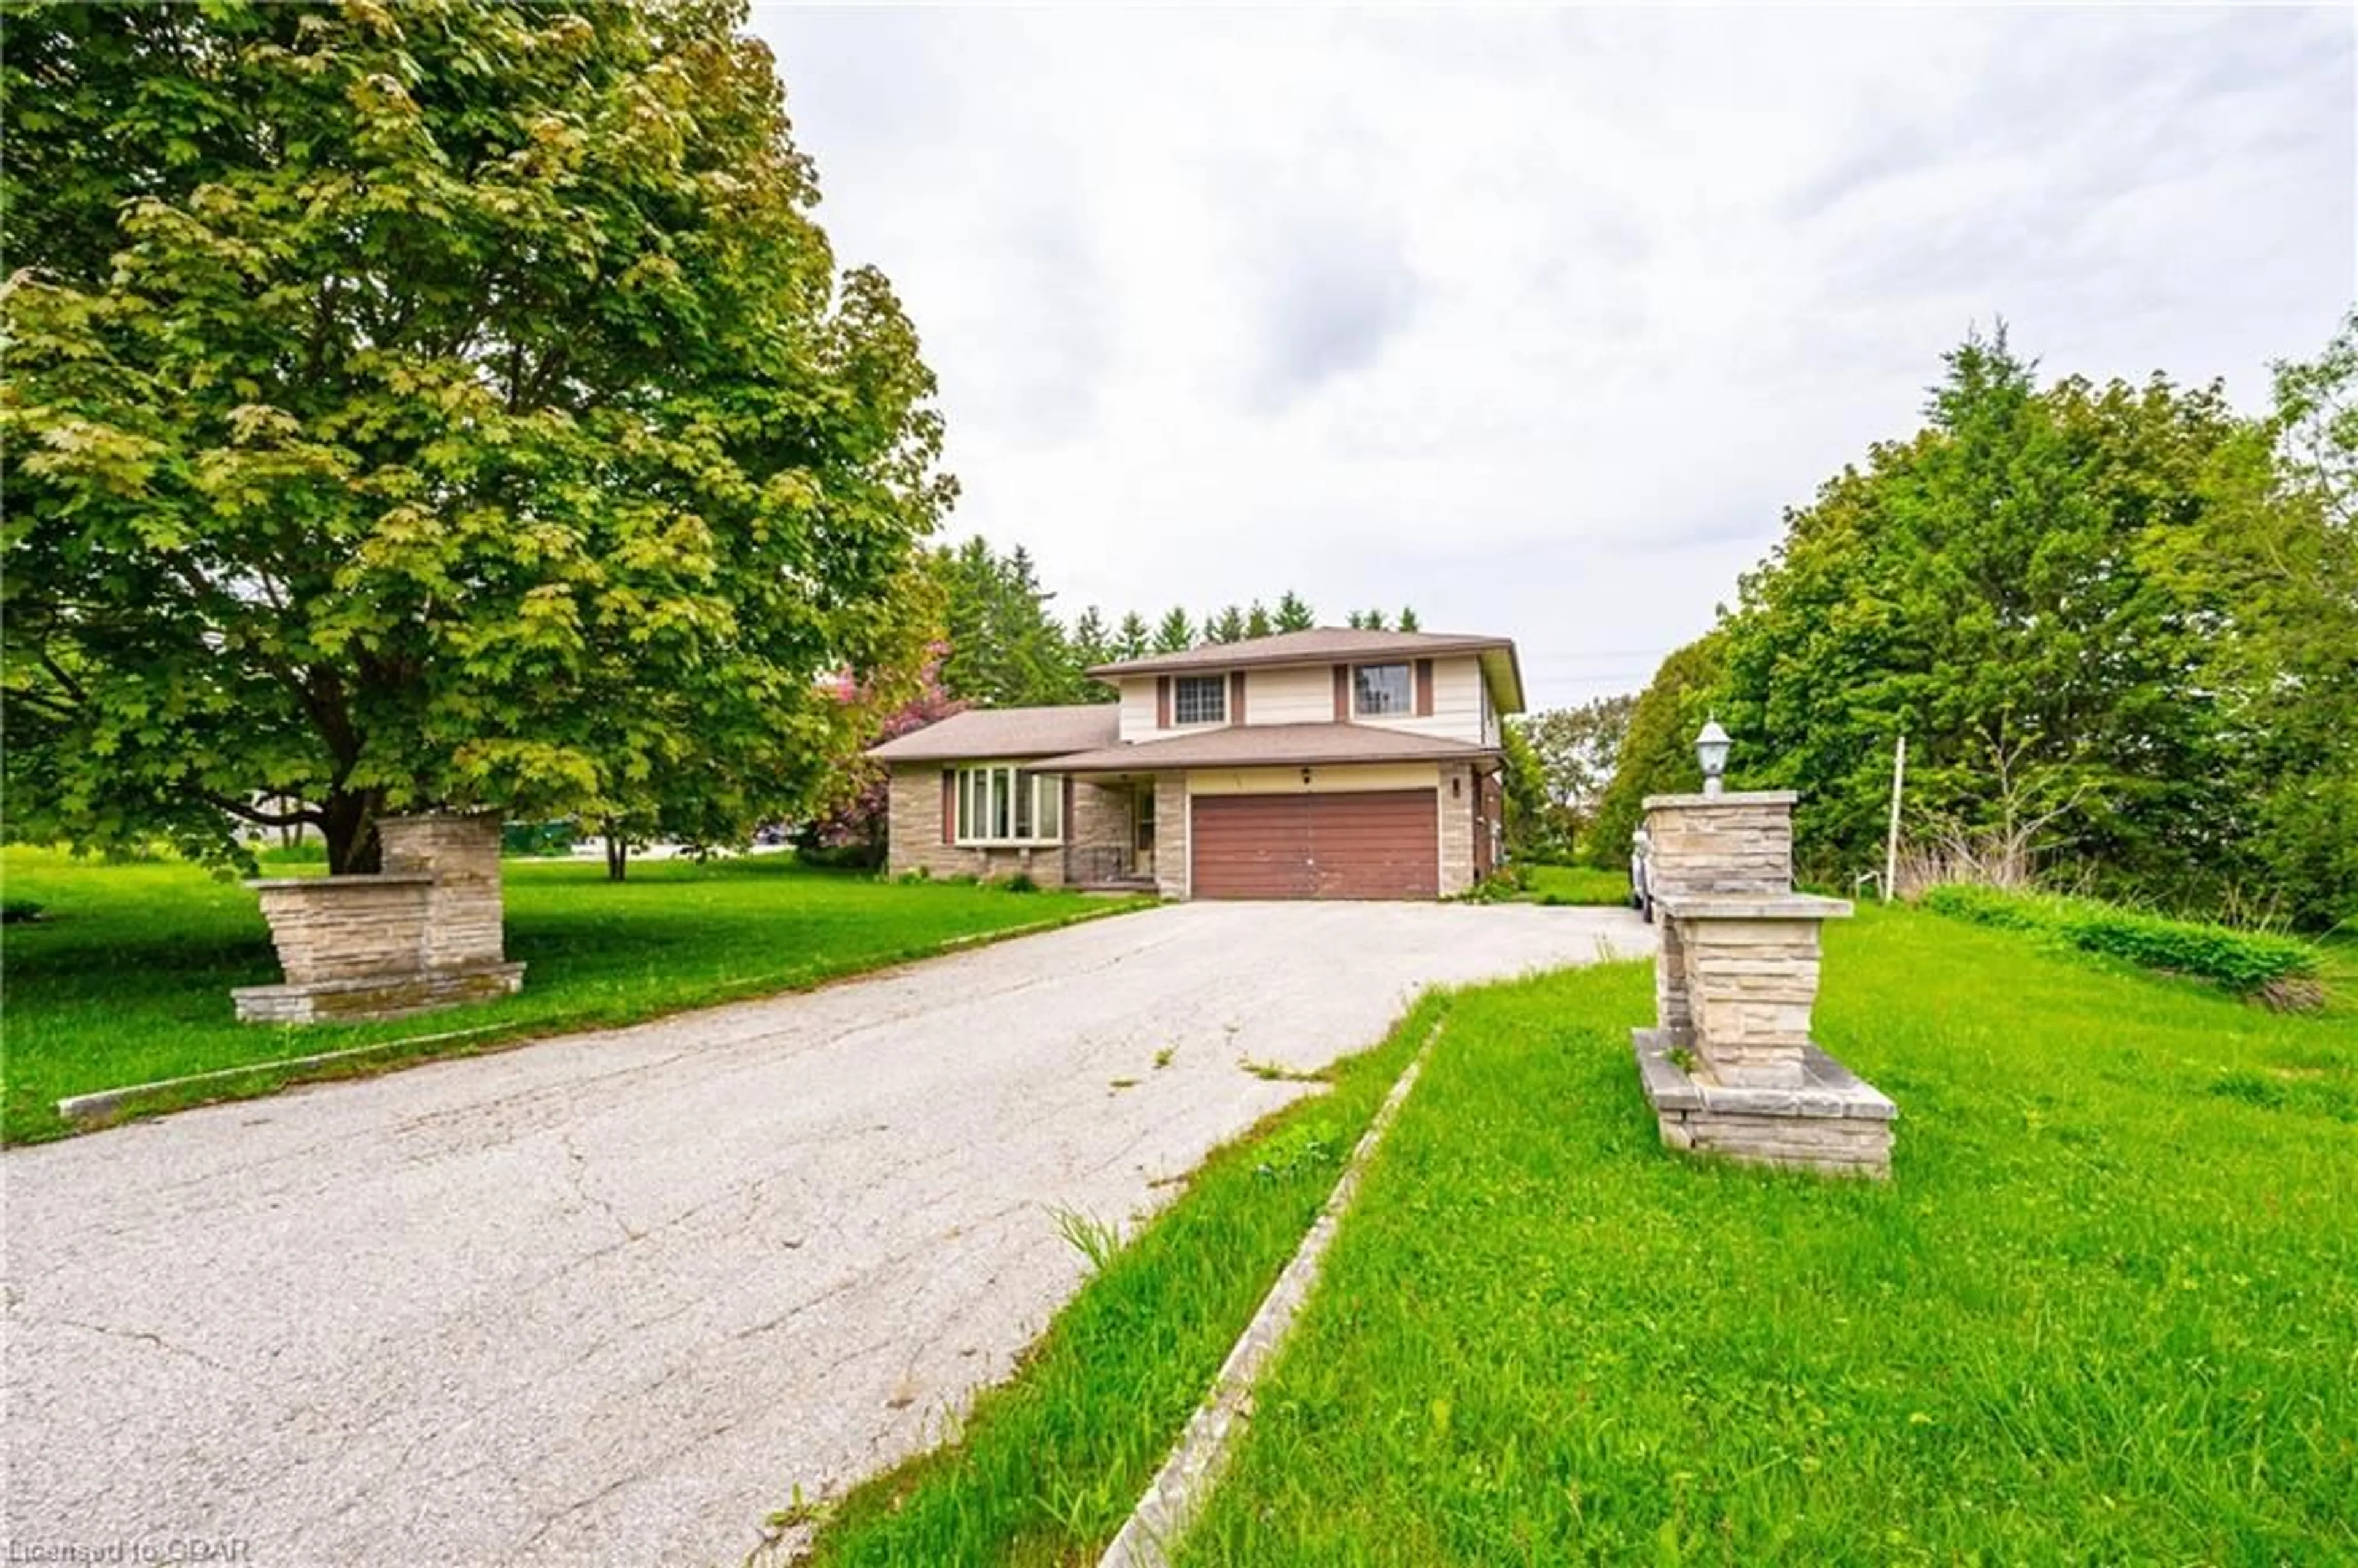 Outside view for 575 Hill St, Fergus Ontario N1M 2X9